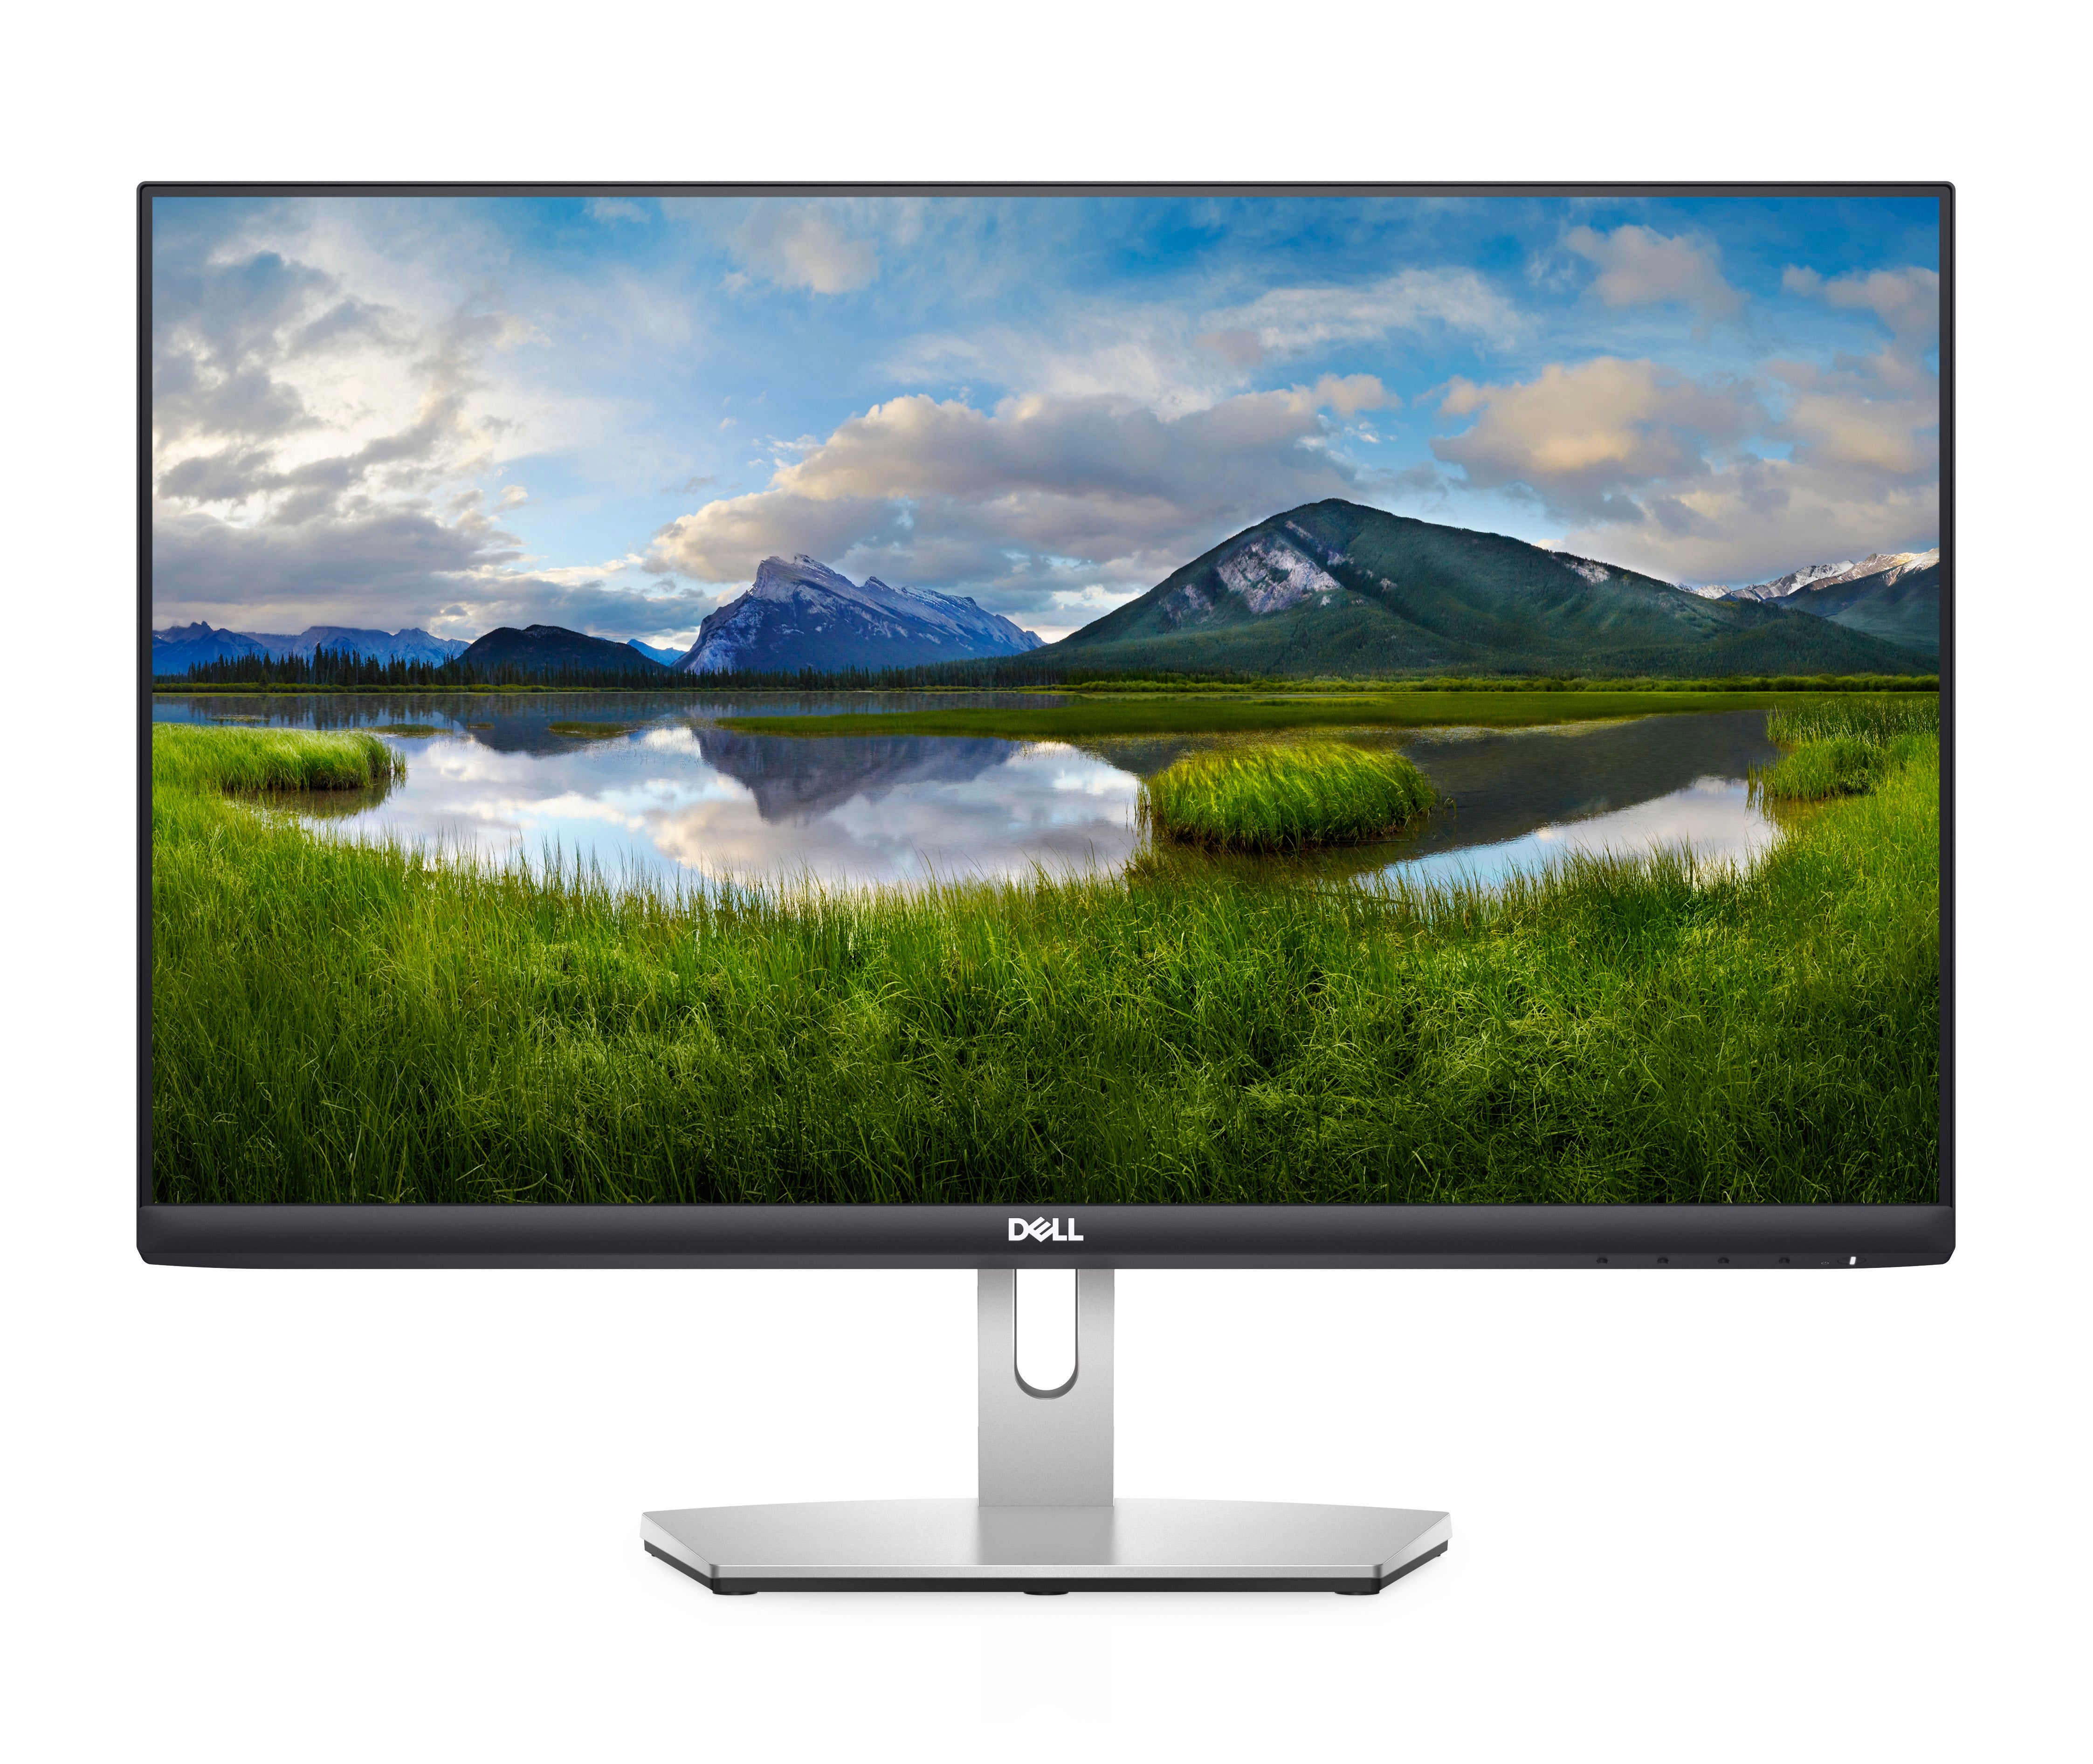 DELL 24 MONITOR S2421HN - 23.8" FHD 60.45CM BLACK, 1920 X 1080 AT 75 HZ, 2 X HDMI PORTS, IN-PLANE SWITCHING (IPS), 1 X AUDIO LINE-OUT PORT, TILT (-5° TO 21°), COLOR DEPTH: